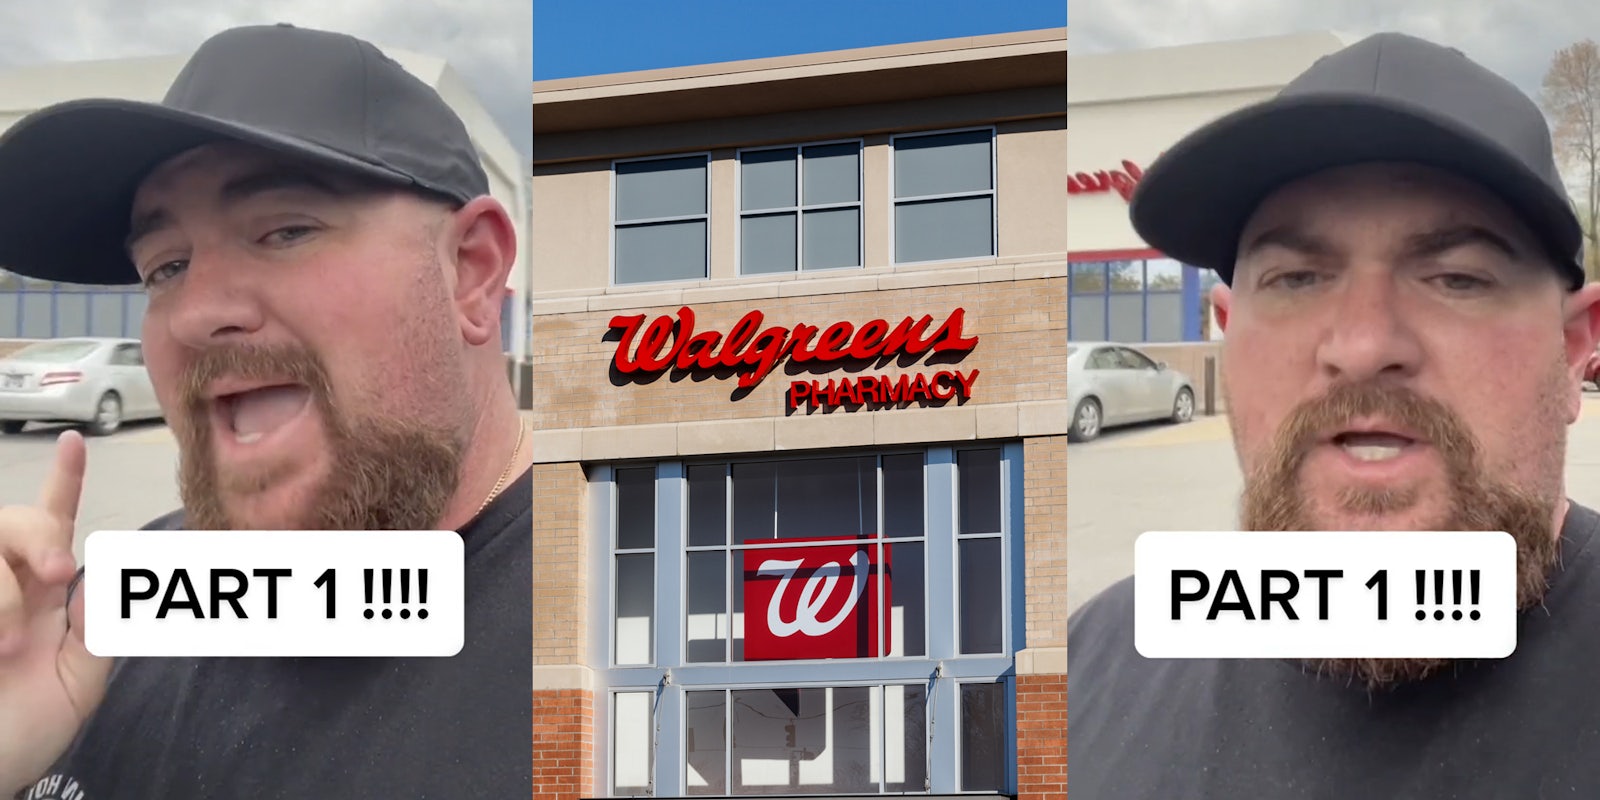 person speaking outside Walgreens with caption 'PART 1!!!!' (l) Walgreens Pharmacy building with sign (c) person speaking outside Walgreens with caption 'PART 1!!!!' (r)